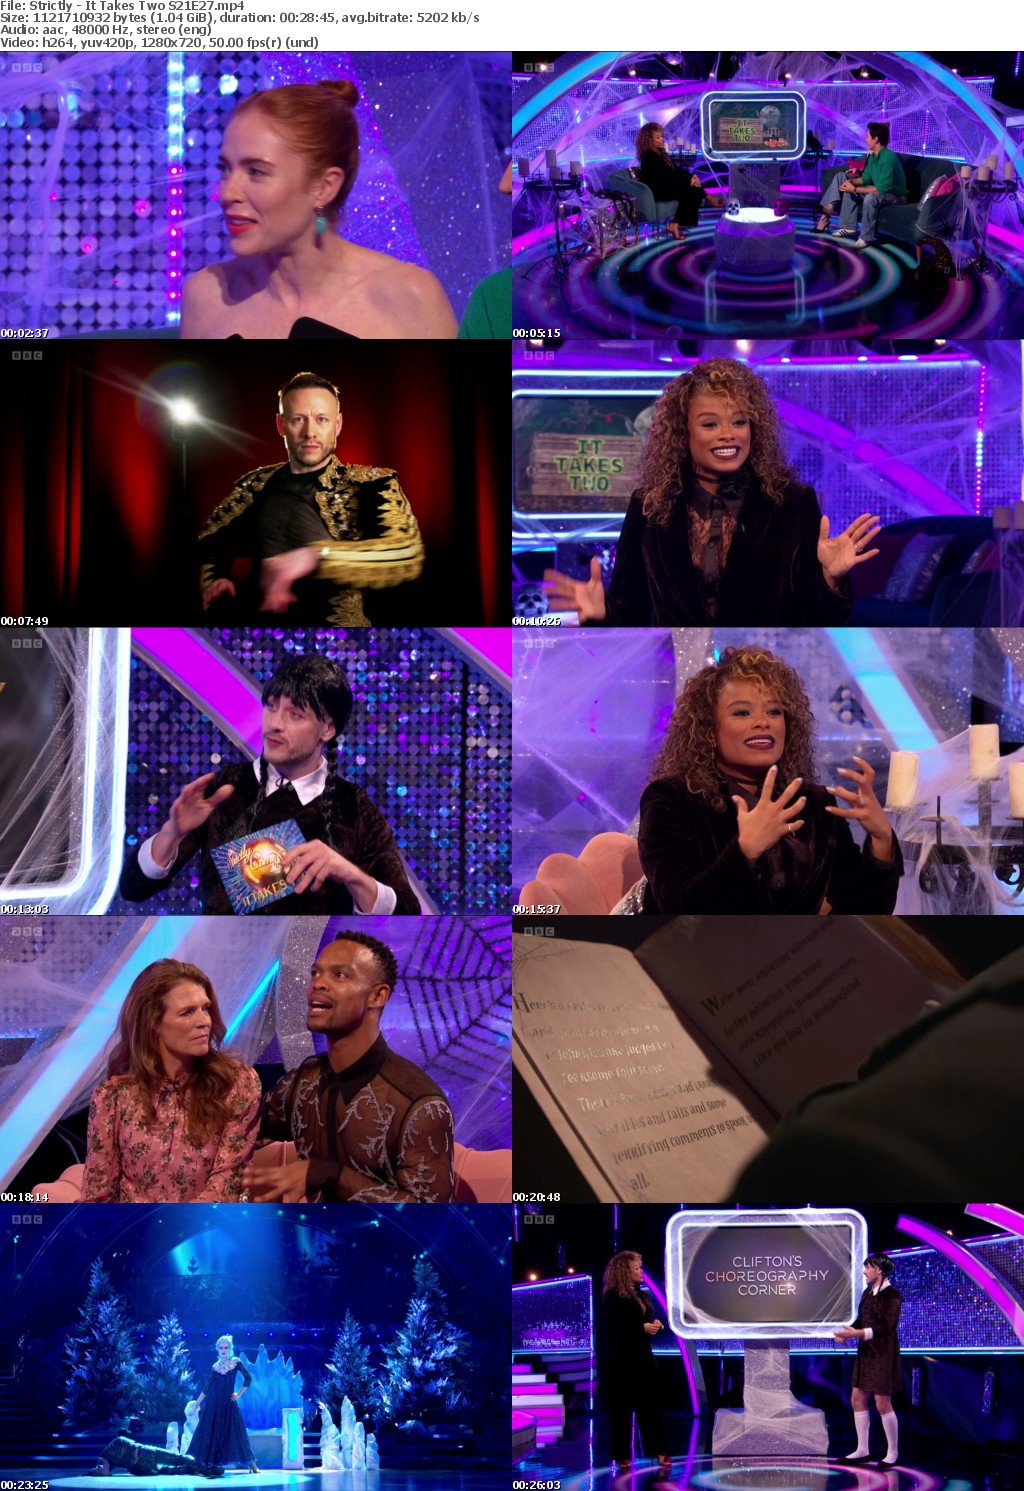 Strictly - It Takes Two S21E27 (1280x720p HD, 50fps, soft Eng subs) PROPER